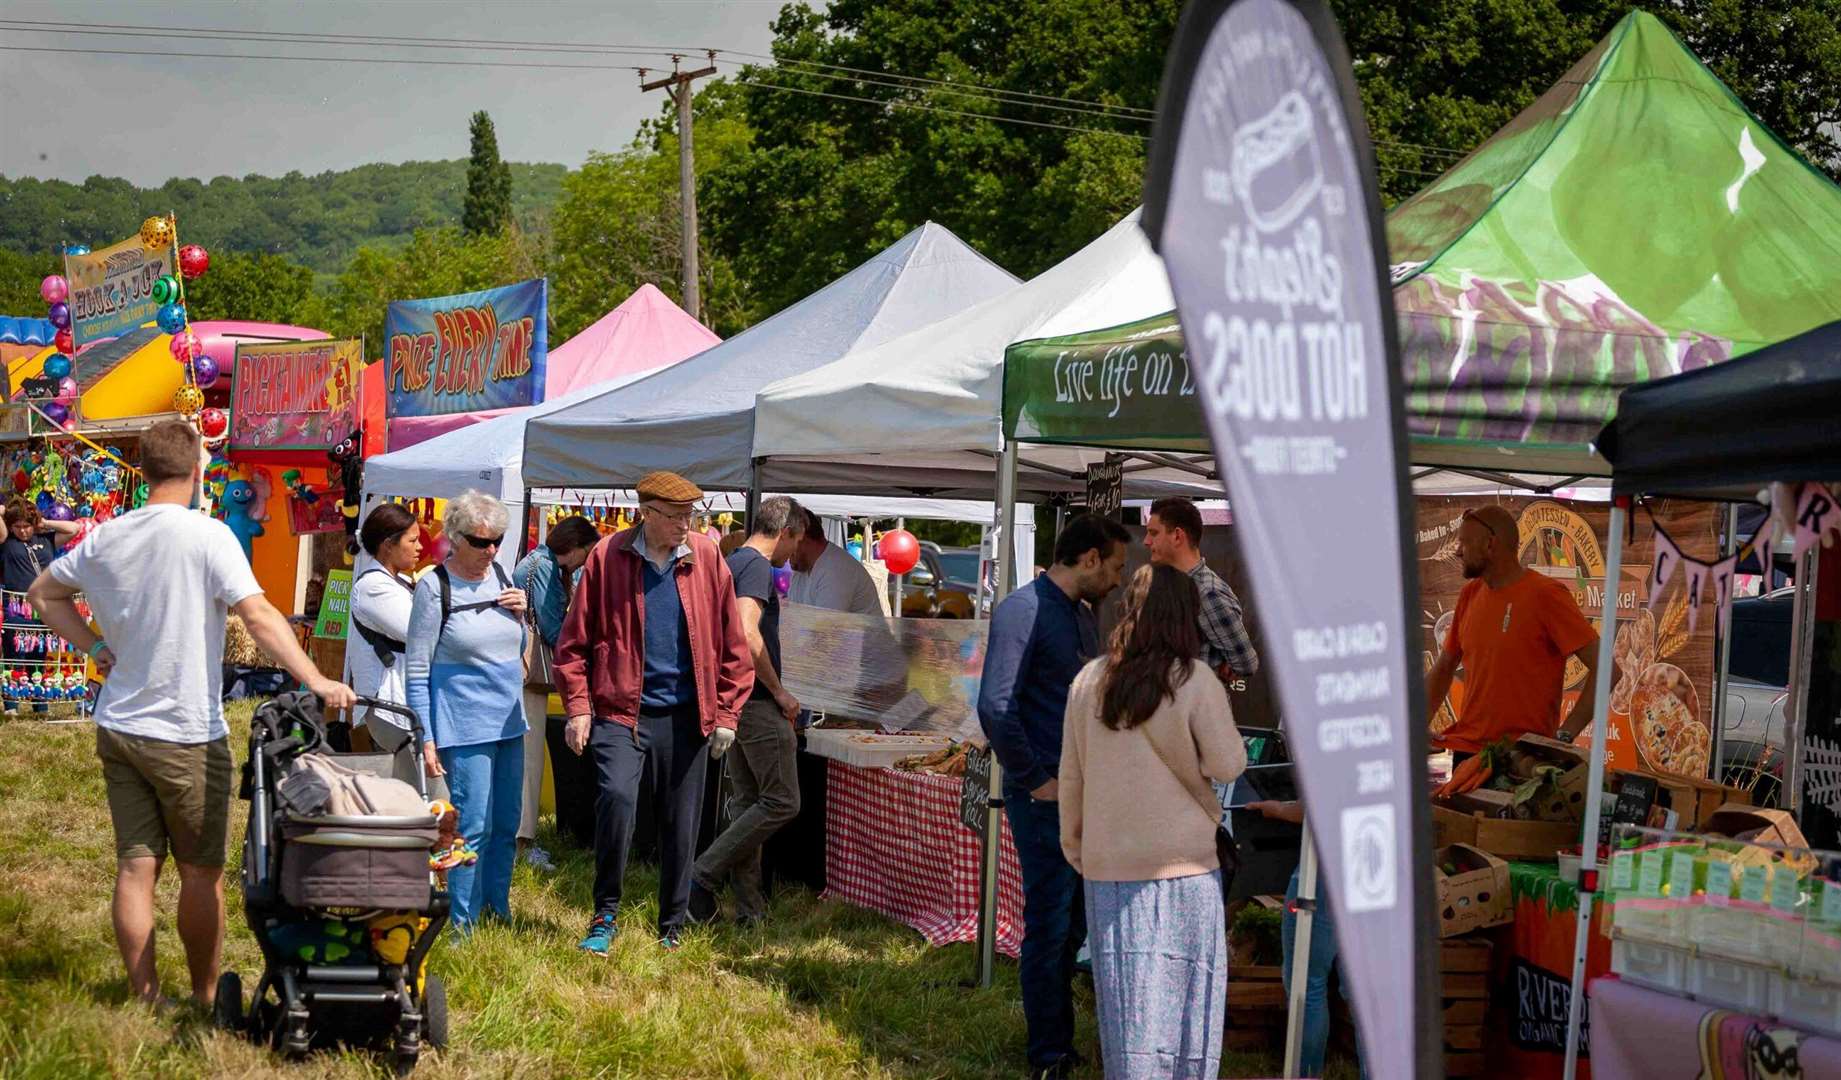 The Kent Food Fest is a huge food festival with plenty of family activities, including games, car shows, live music and DJs. Picture: Kent Food Fest